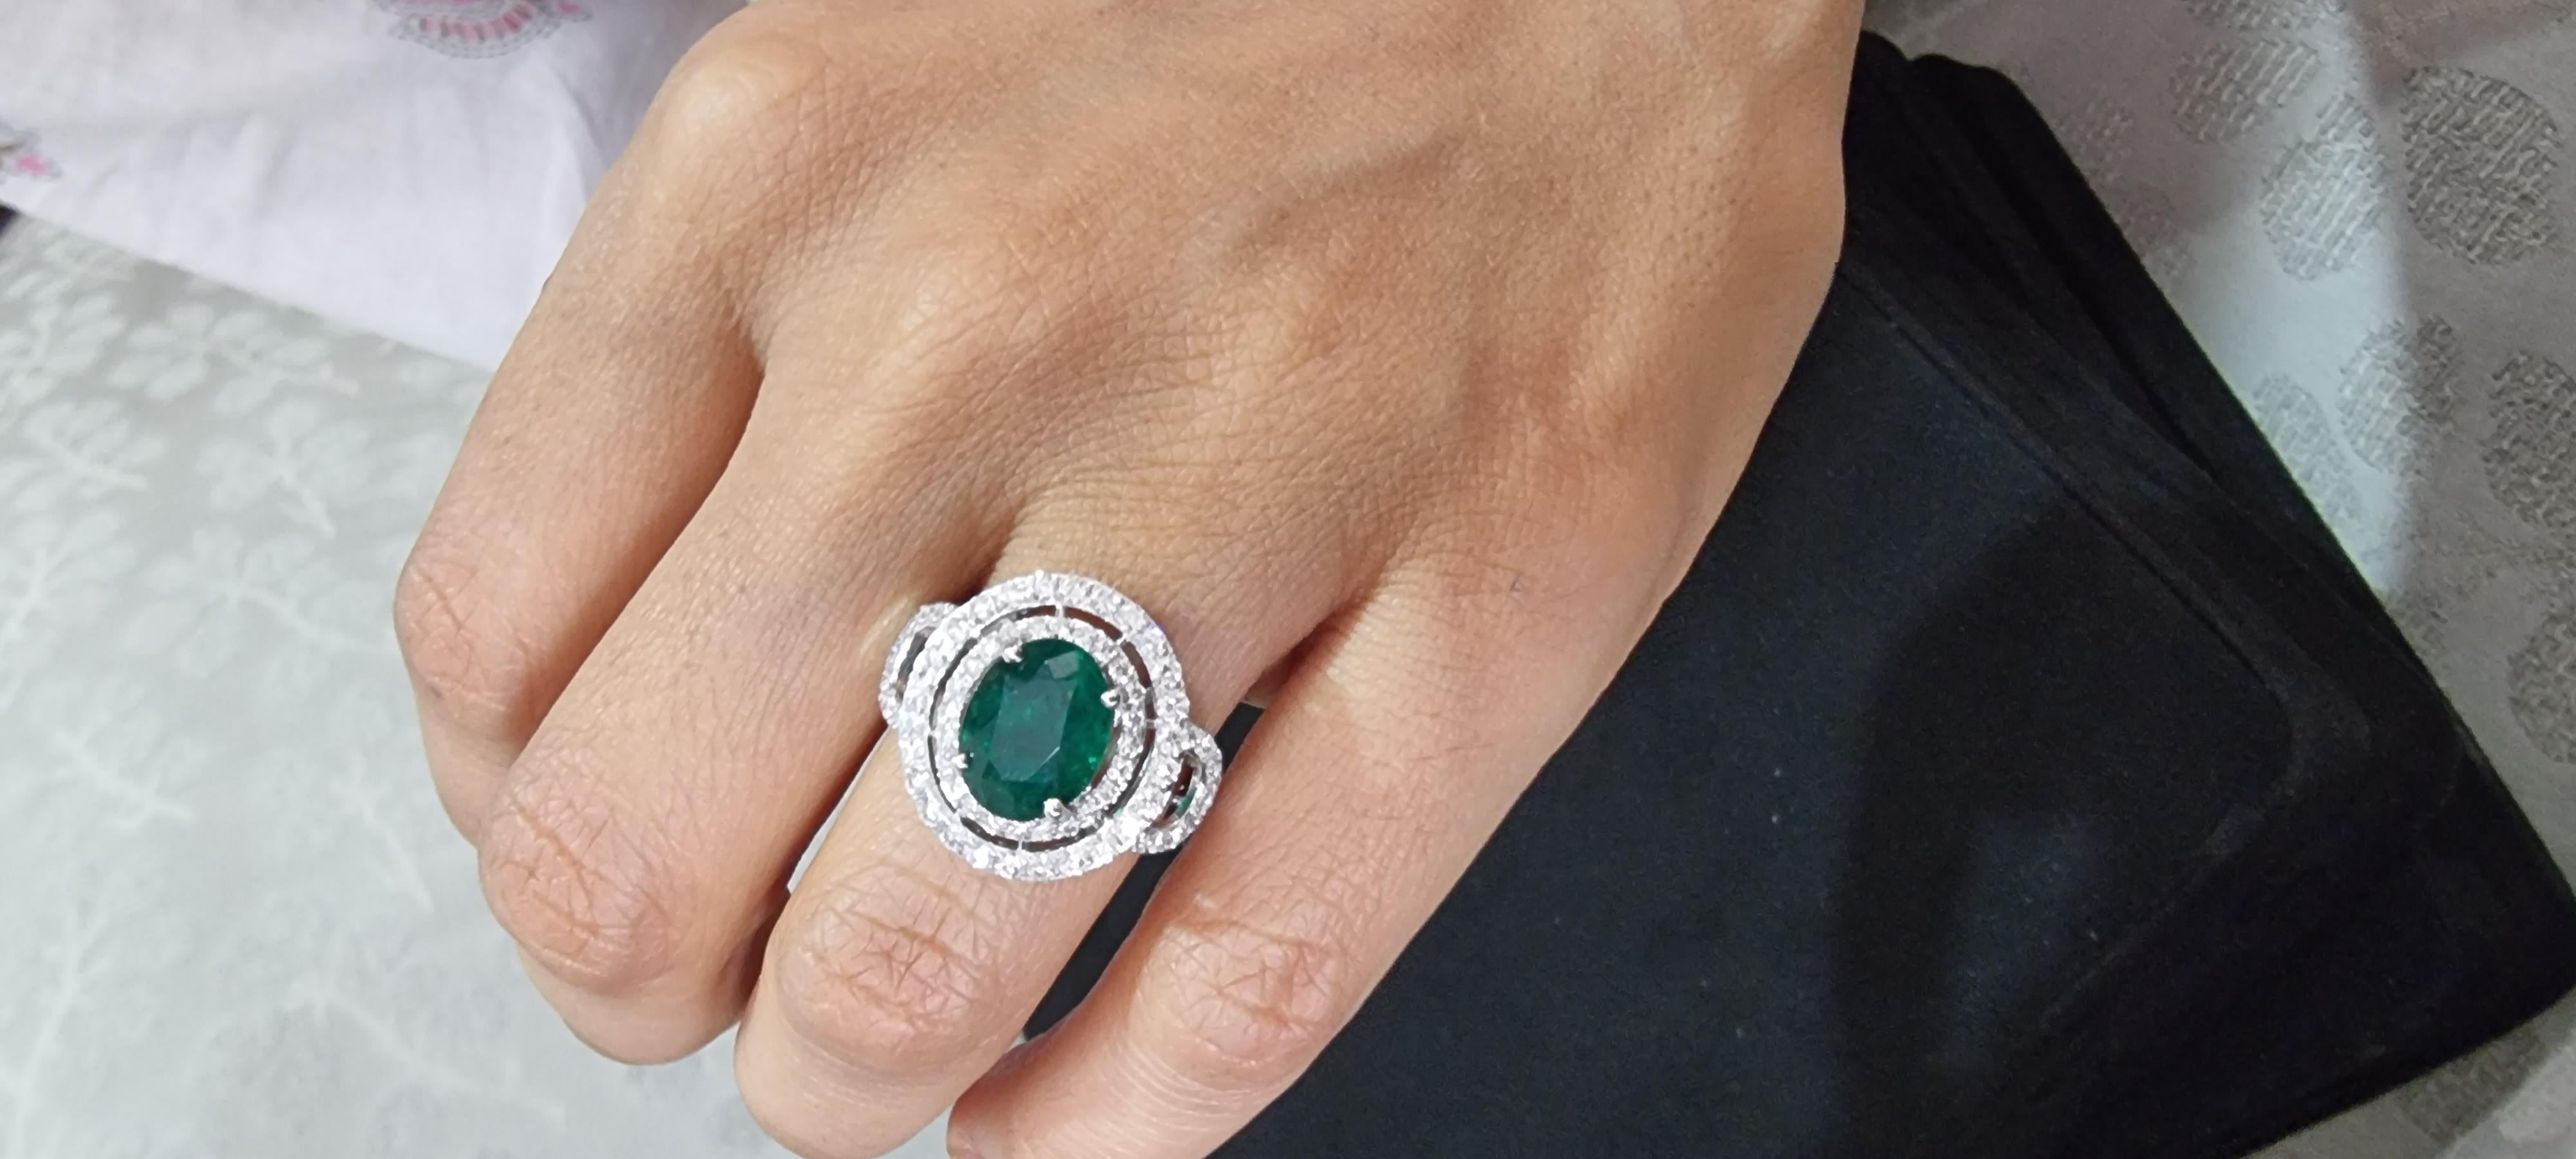 Natural Zambian Emerald Ring with Diamonds and 14k Gold In New Condition For Sale In New York, NY